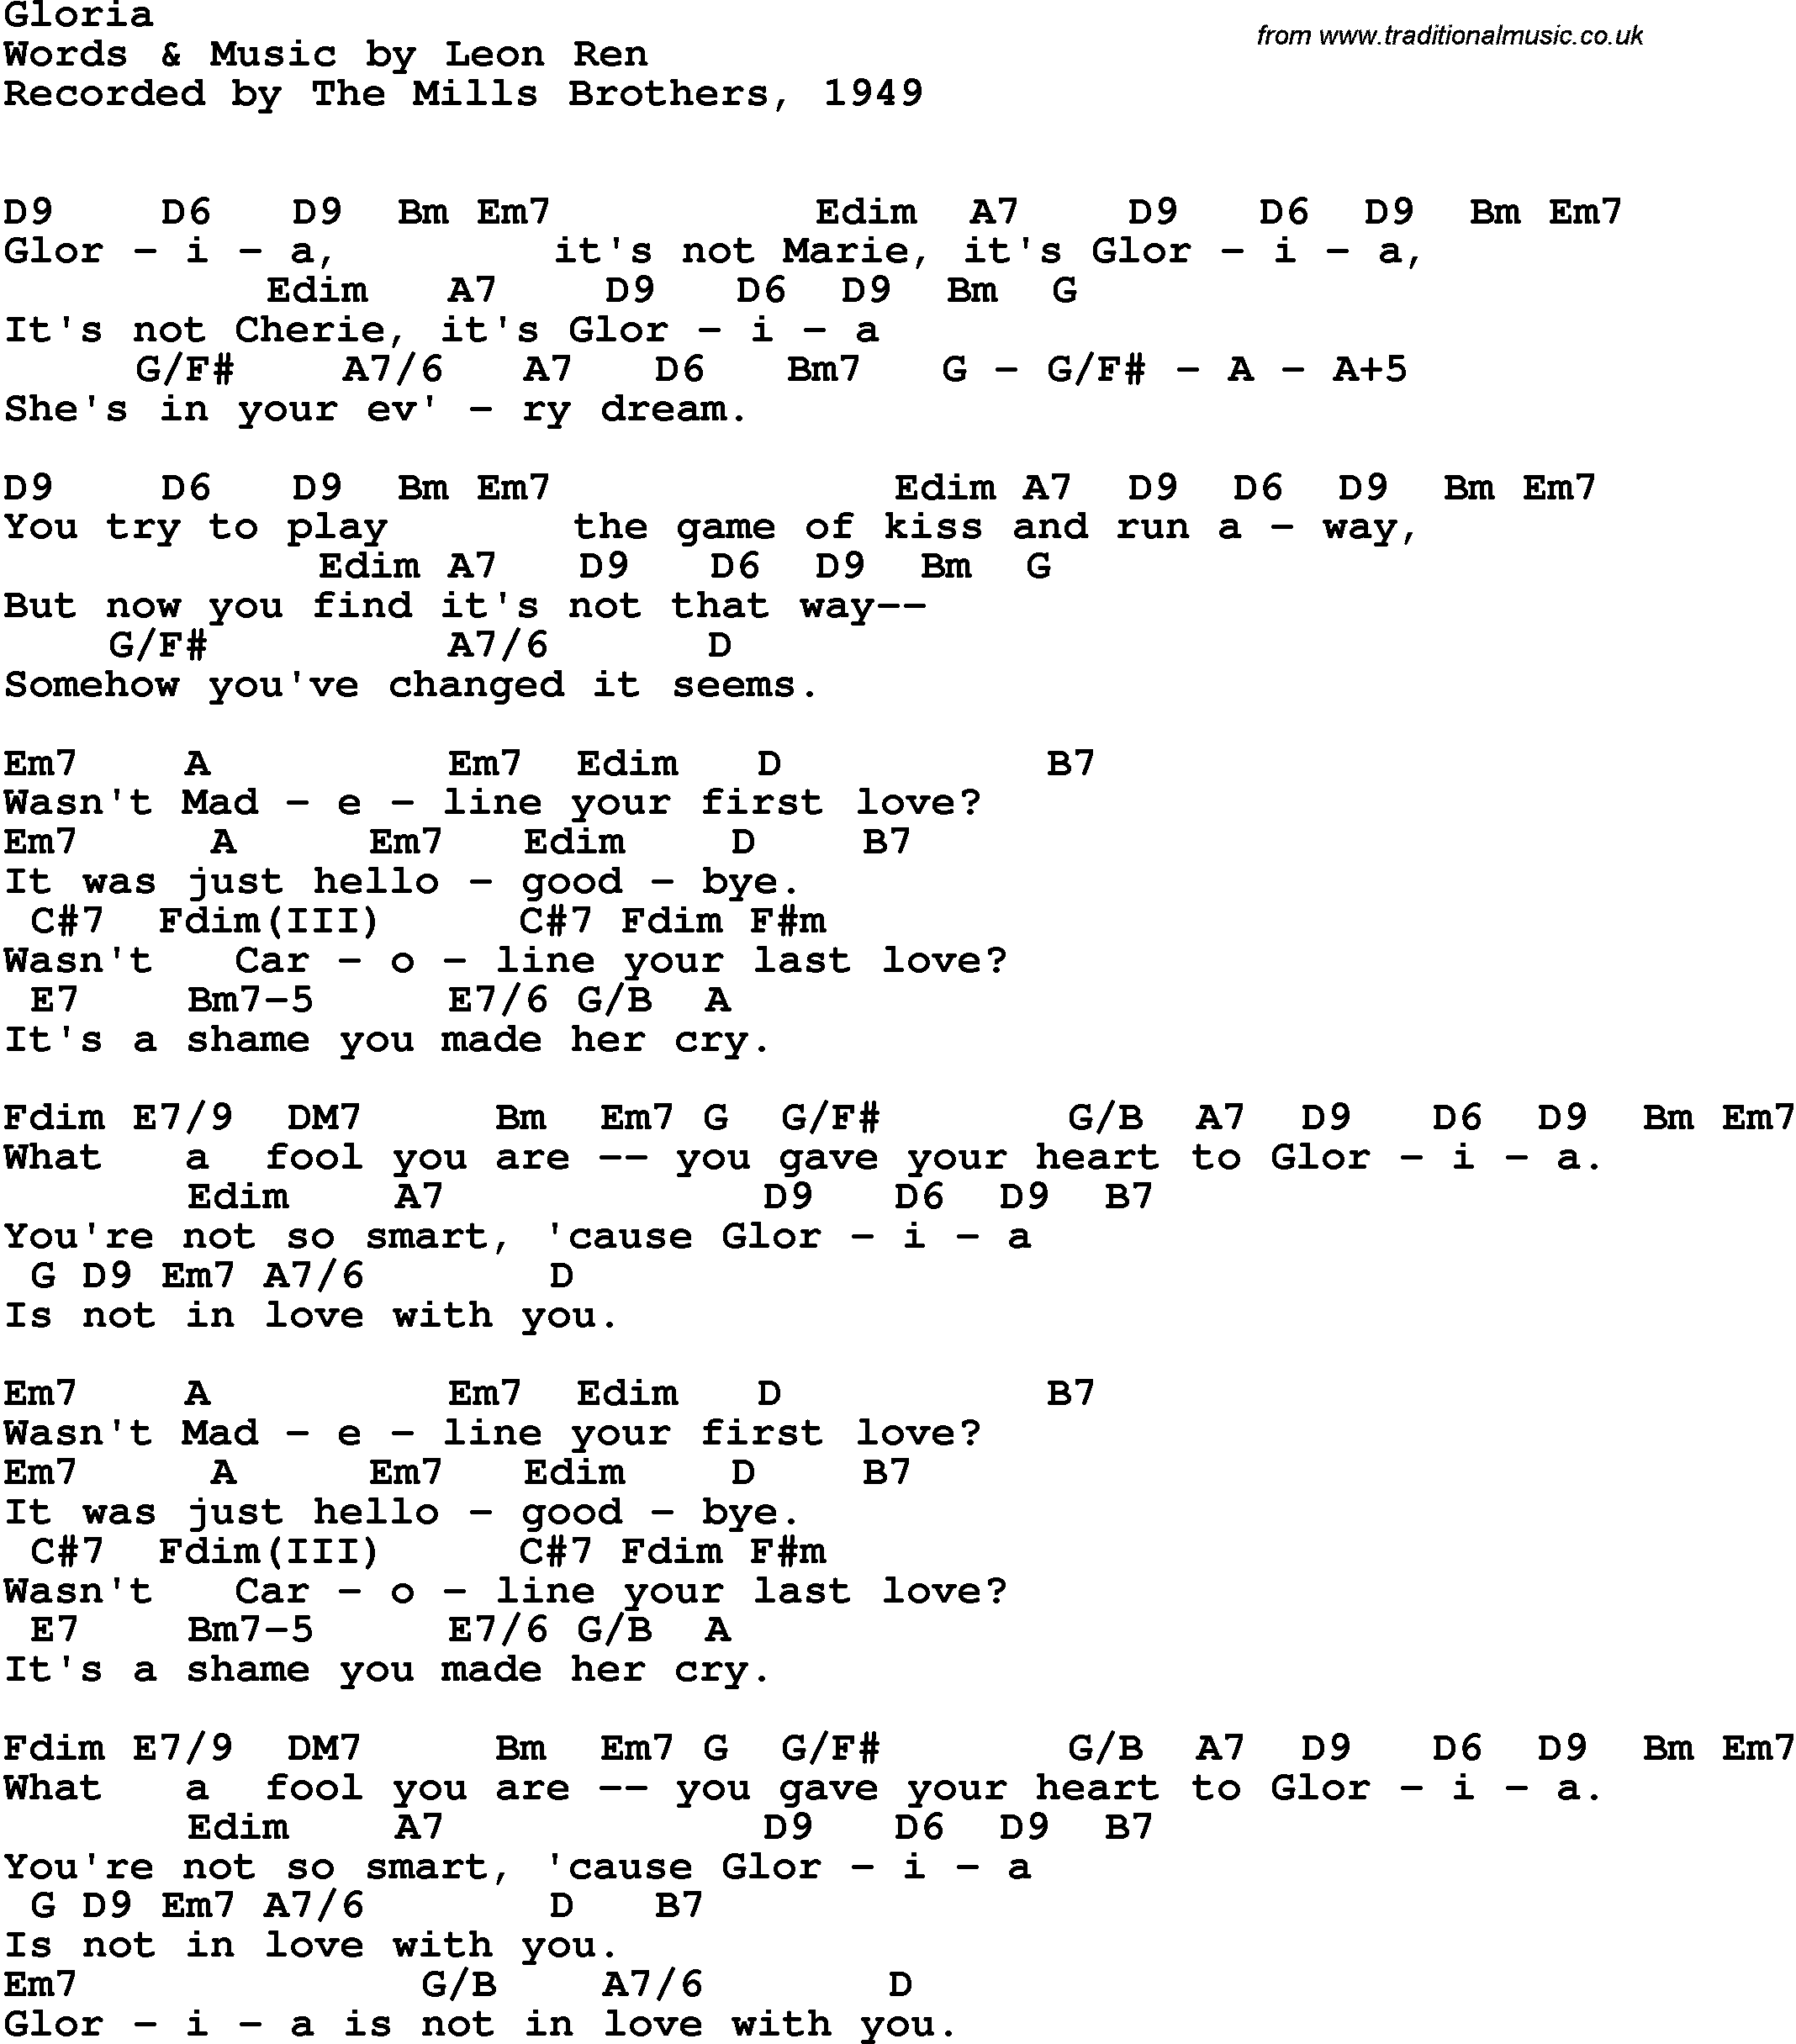 Song Lyrics with guitar chords for Gloria - The Mills Brothers, 1949